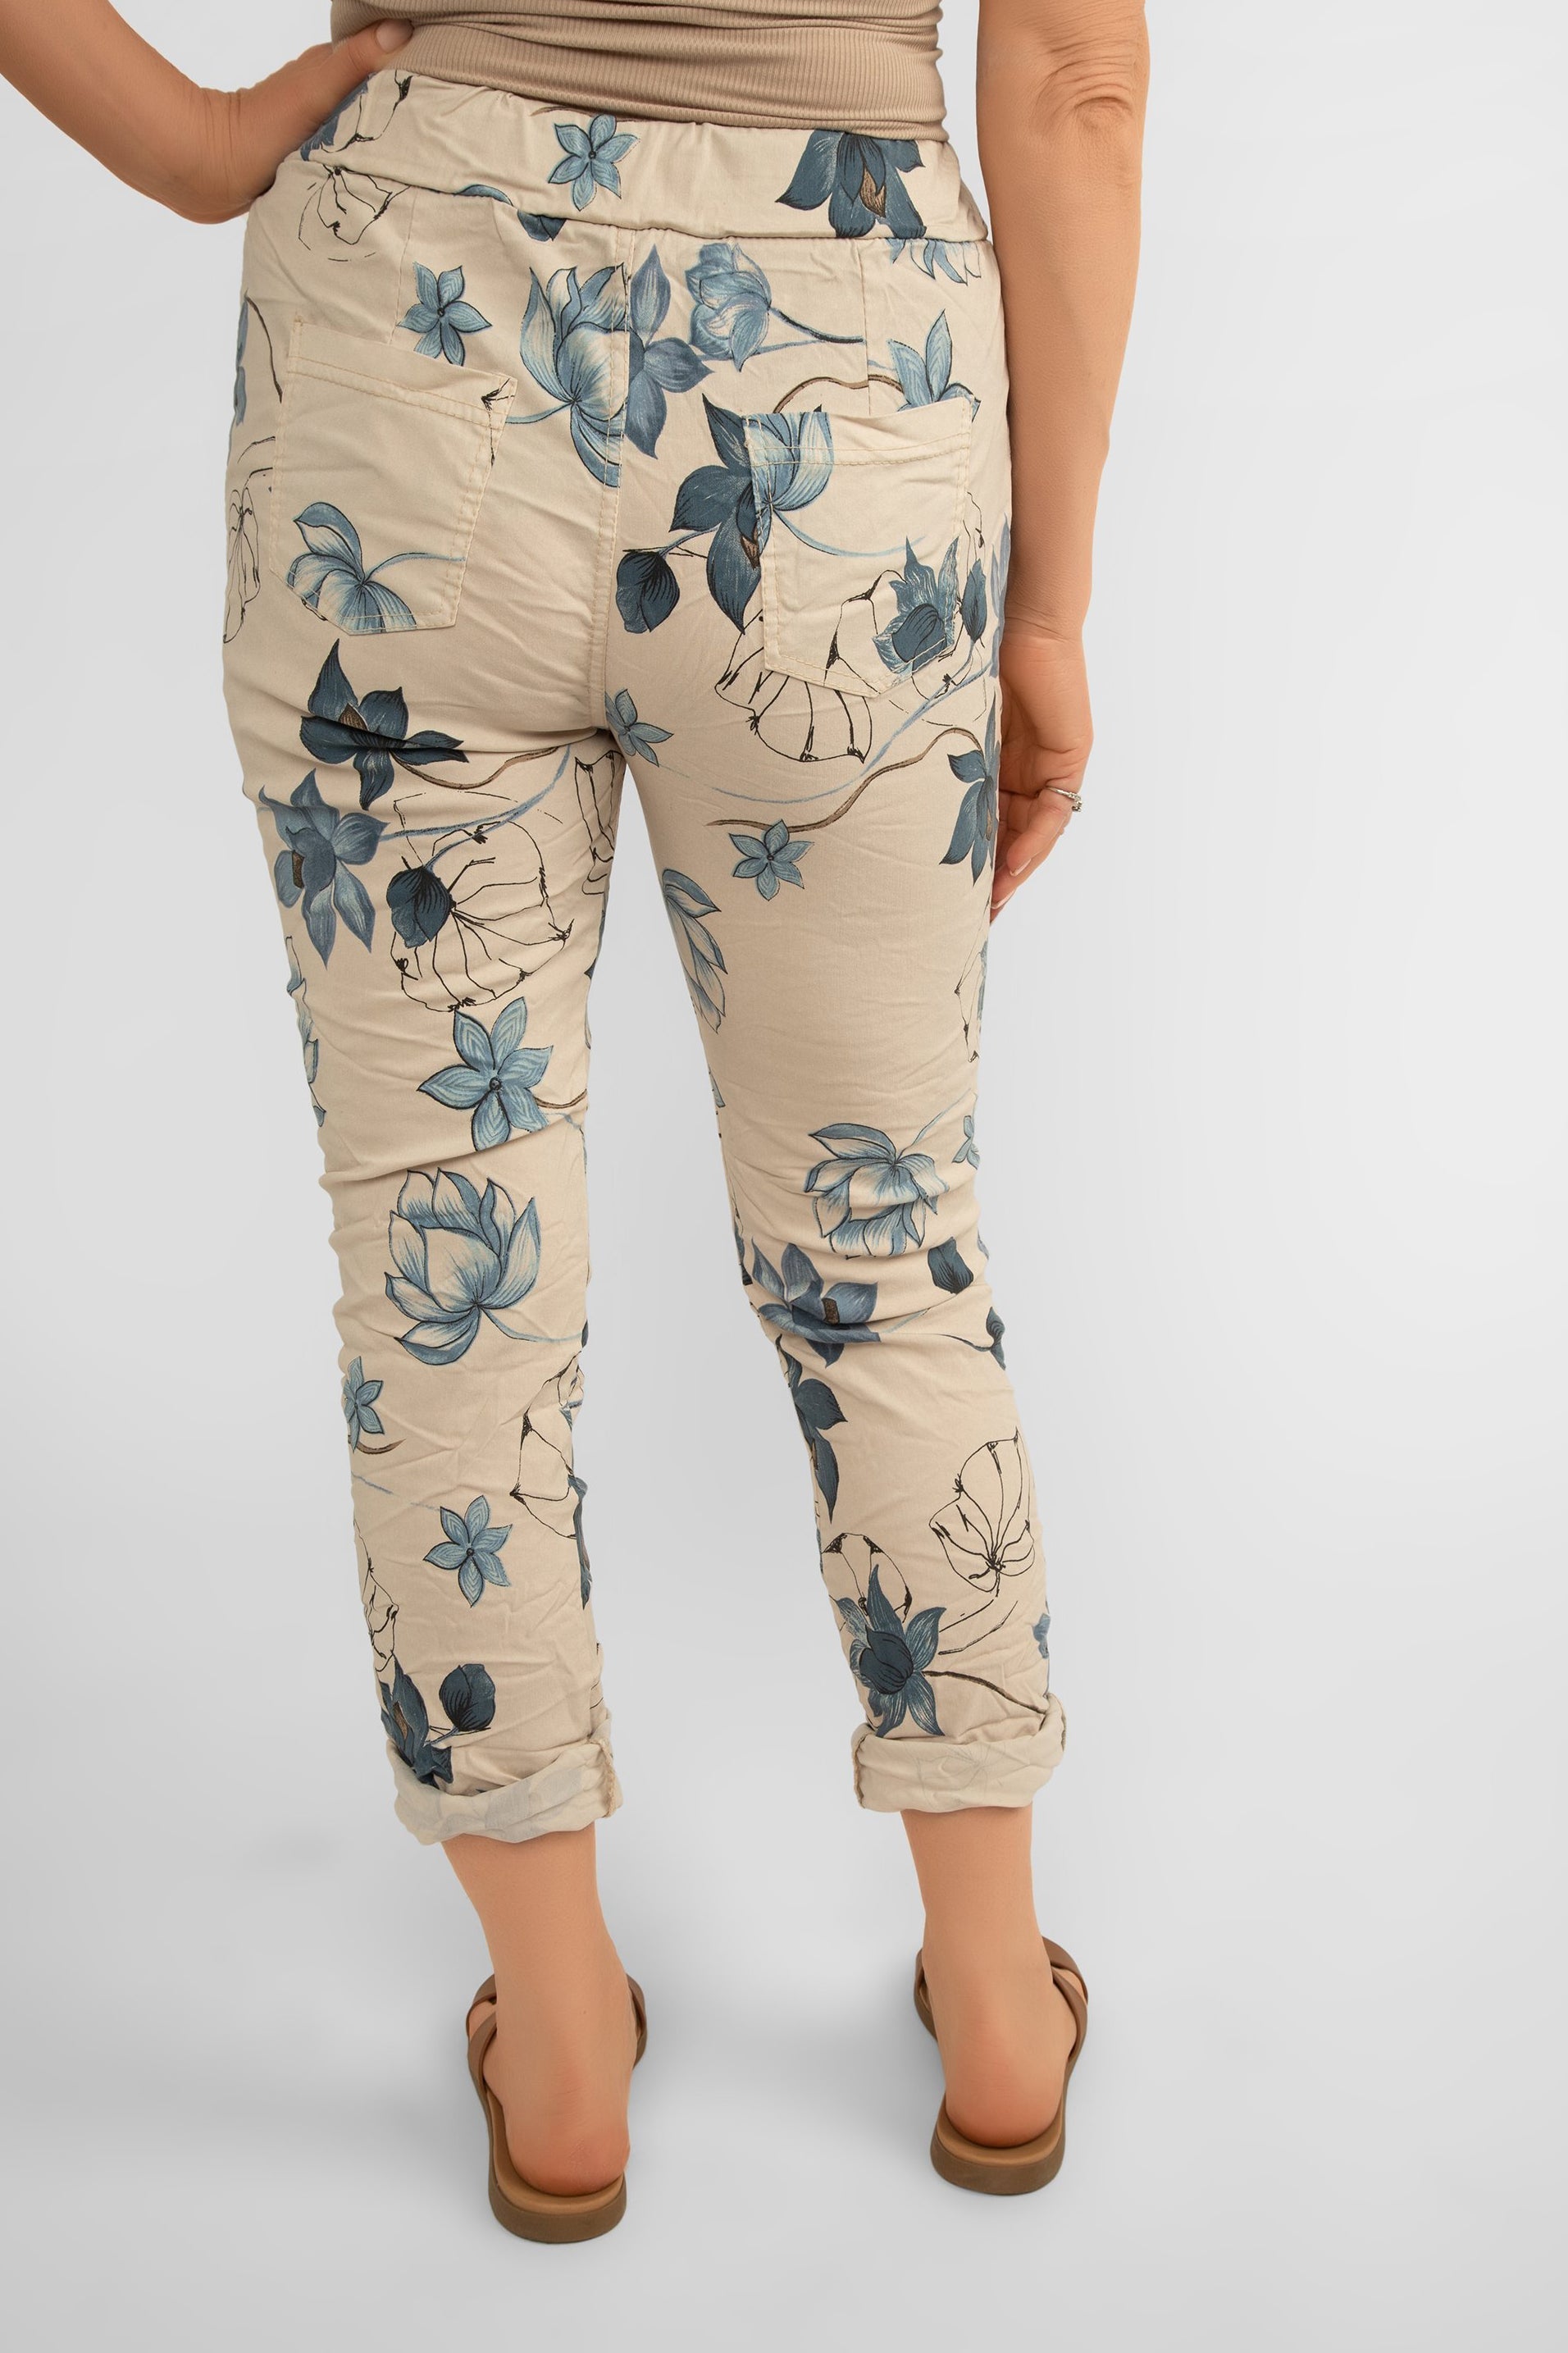 Back view of Bella Amore (21036) Women's Pull On Crinkle Pants with Side Pockets, Rolled Hem, and Blue Lotus Flower Print in Beige